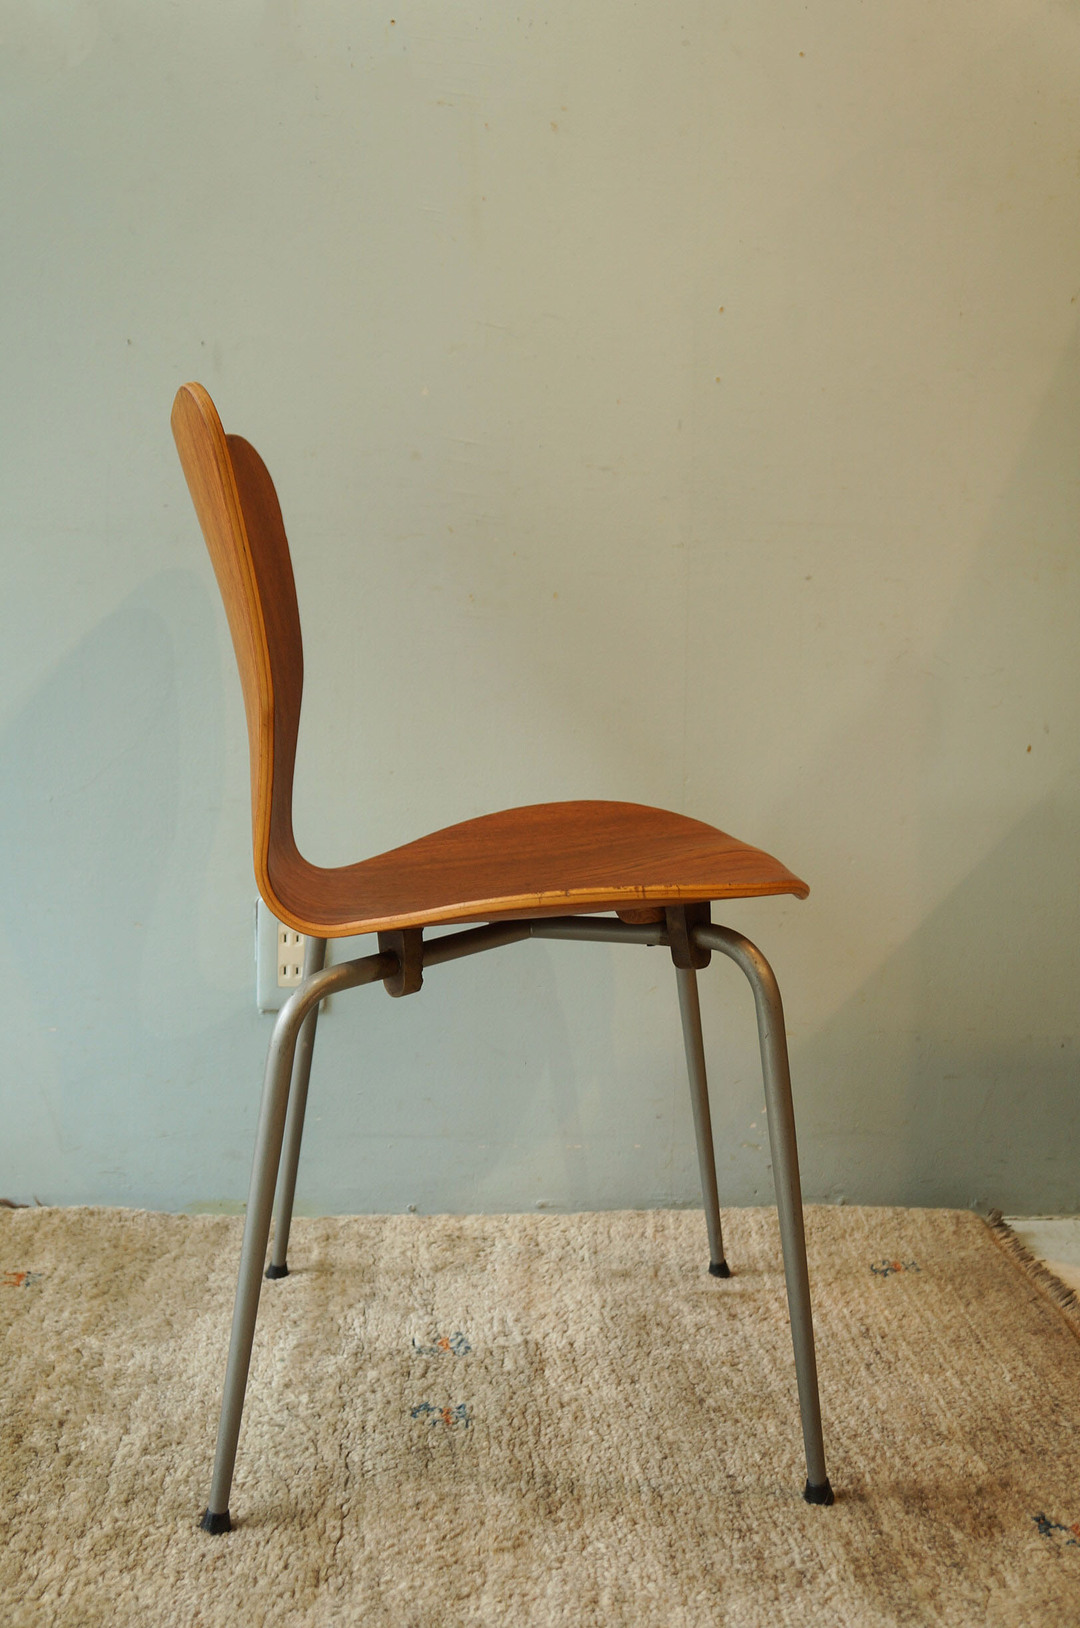 Danish Vintage Teak Plywood Stacking Chair MH Stålmøbler/デンマークヴィンテージ スタッキングチェア チーク材 プライウッド 椅子 ミッドセンチュリー モダン 北欧家具 10